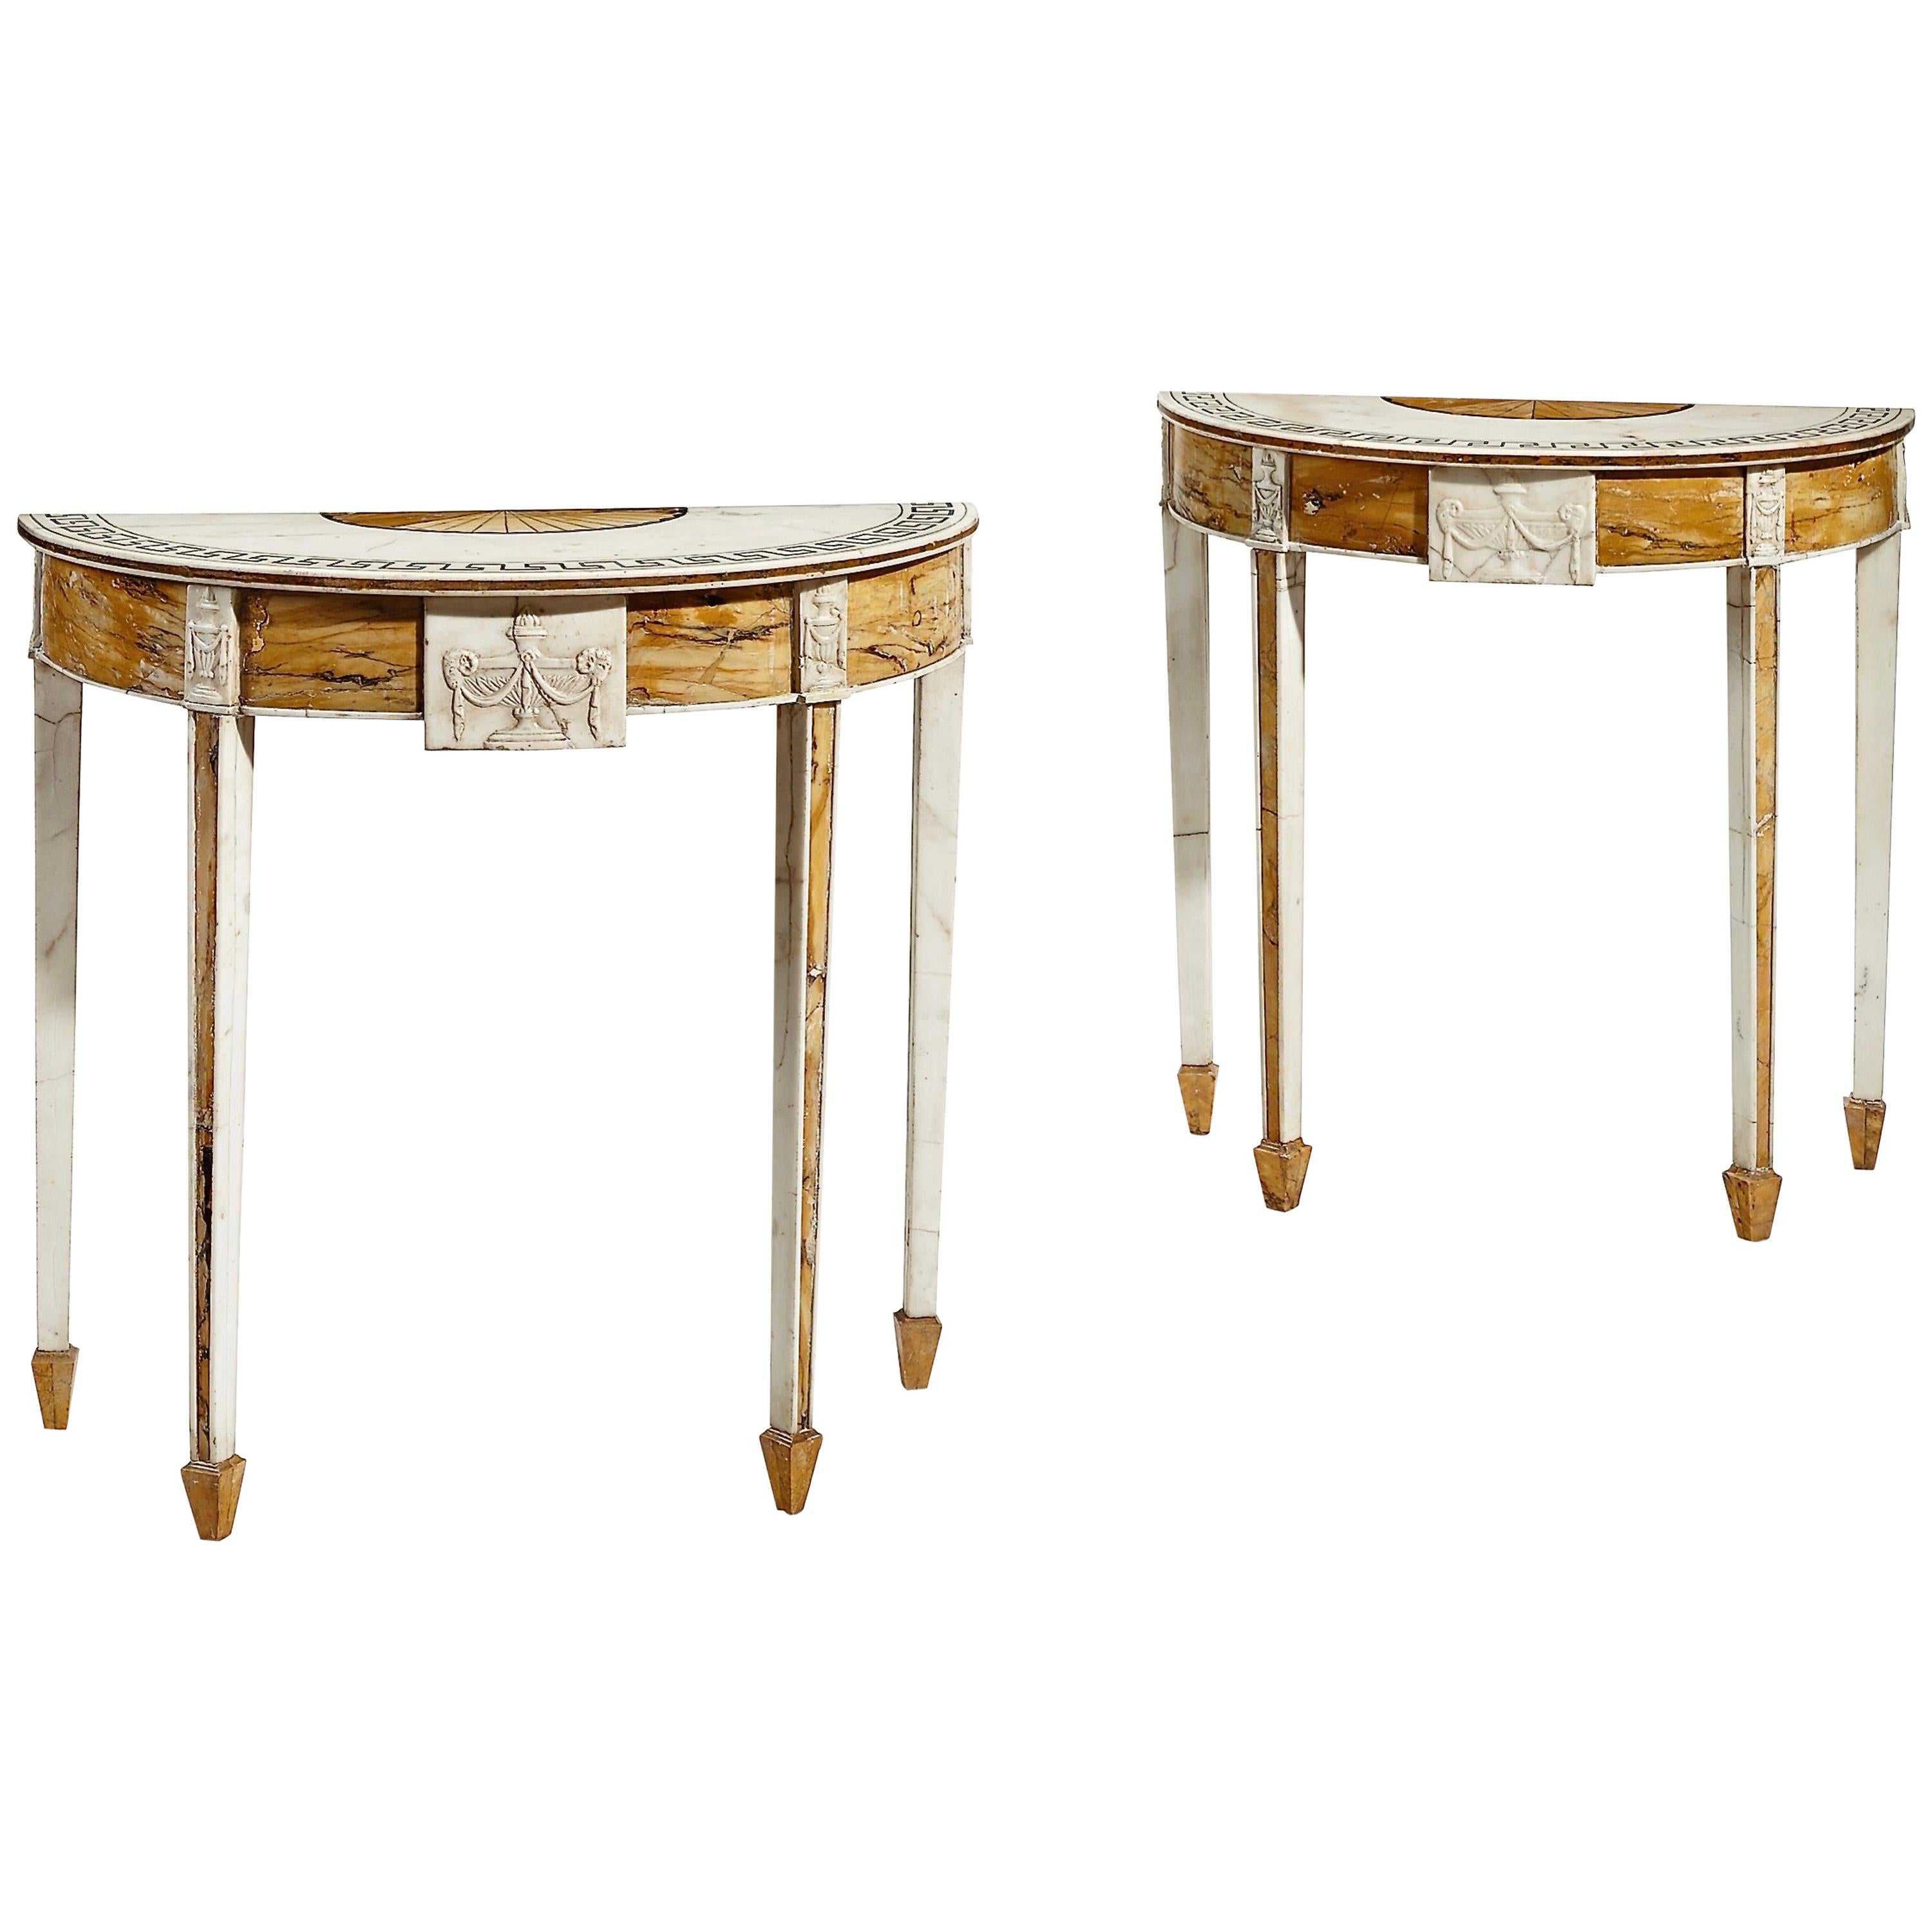 Pair of 19th Century Irish Marble Neoclassical Console Tables